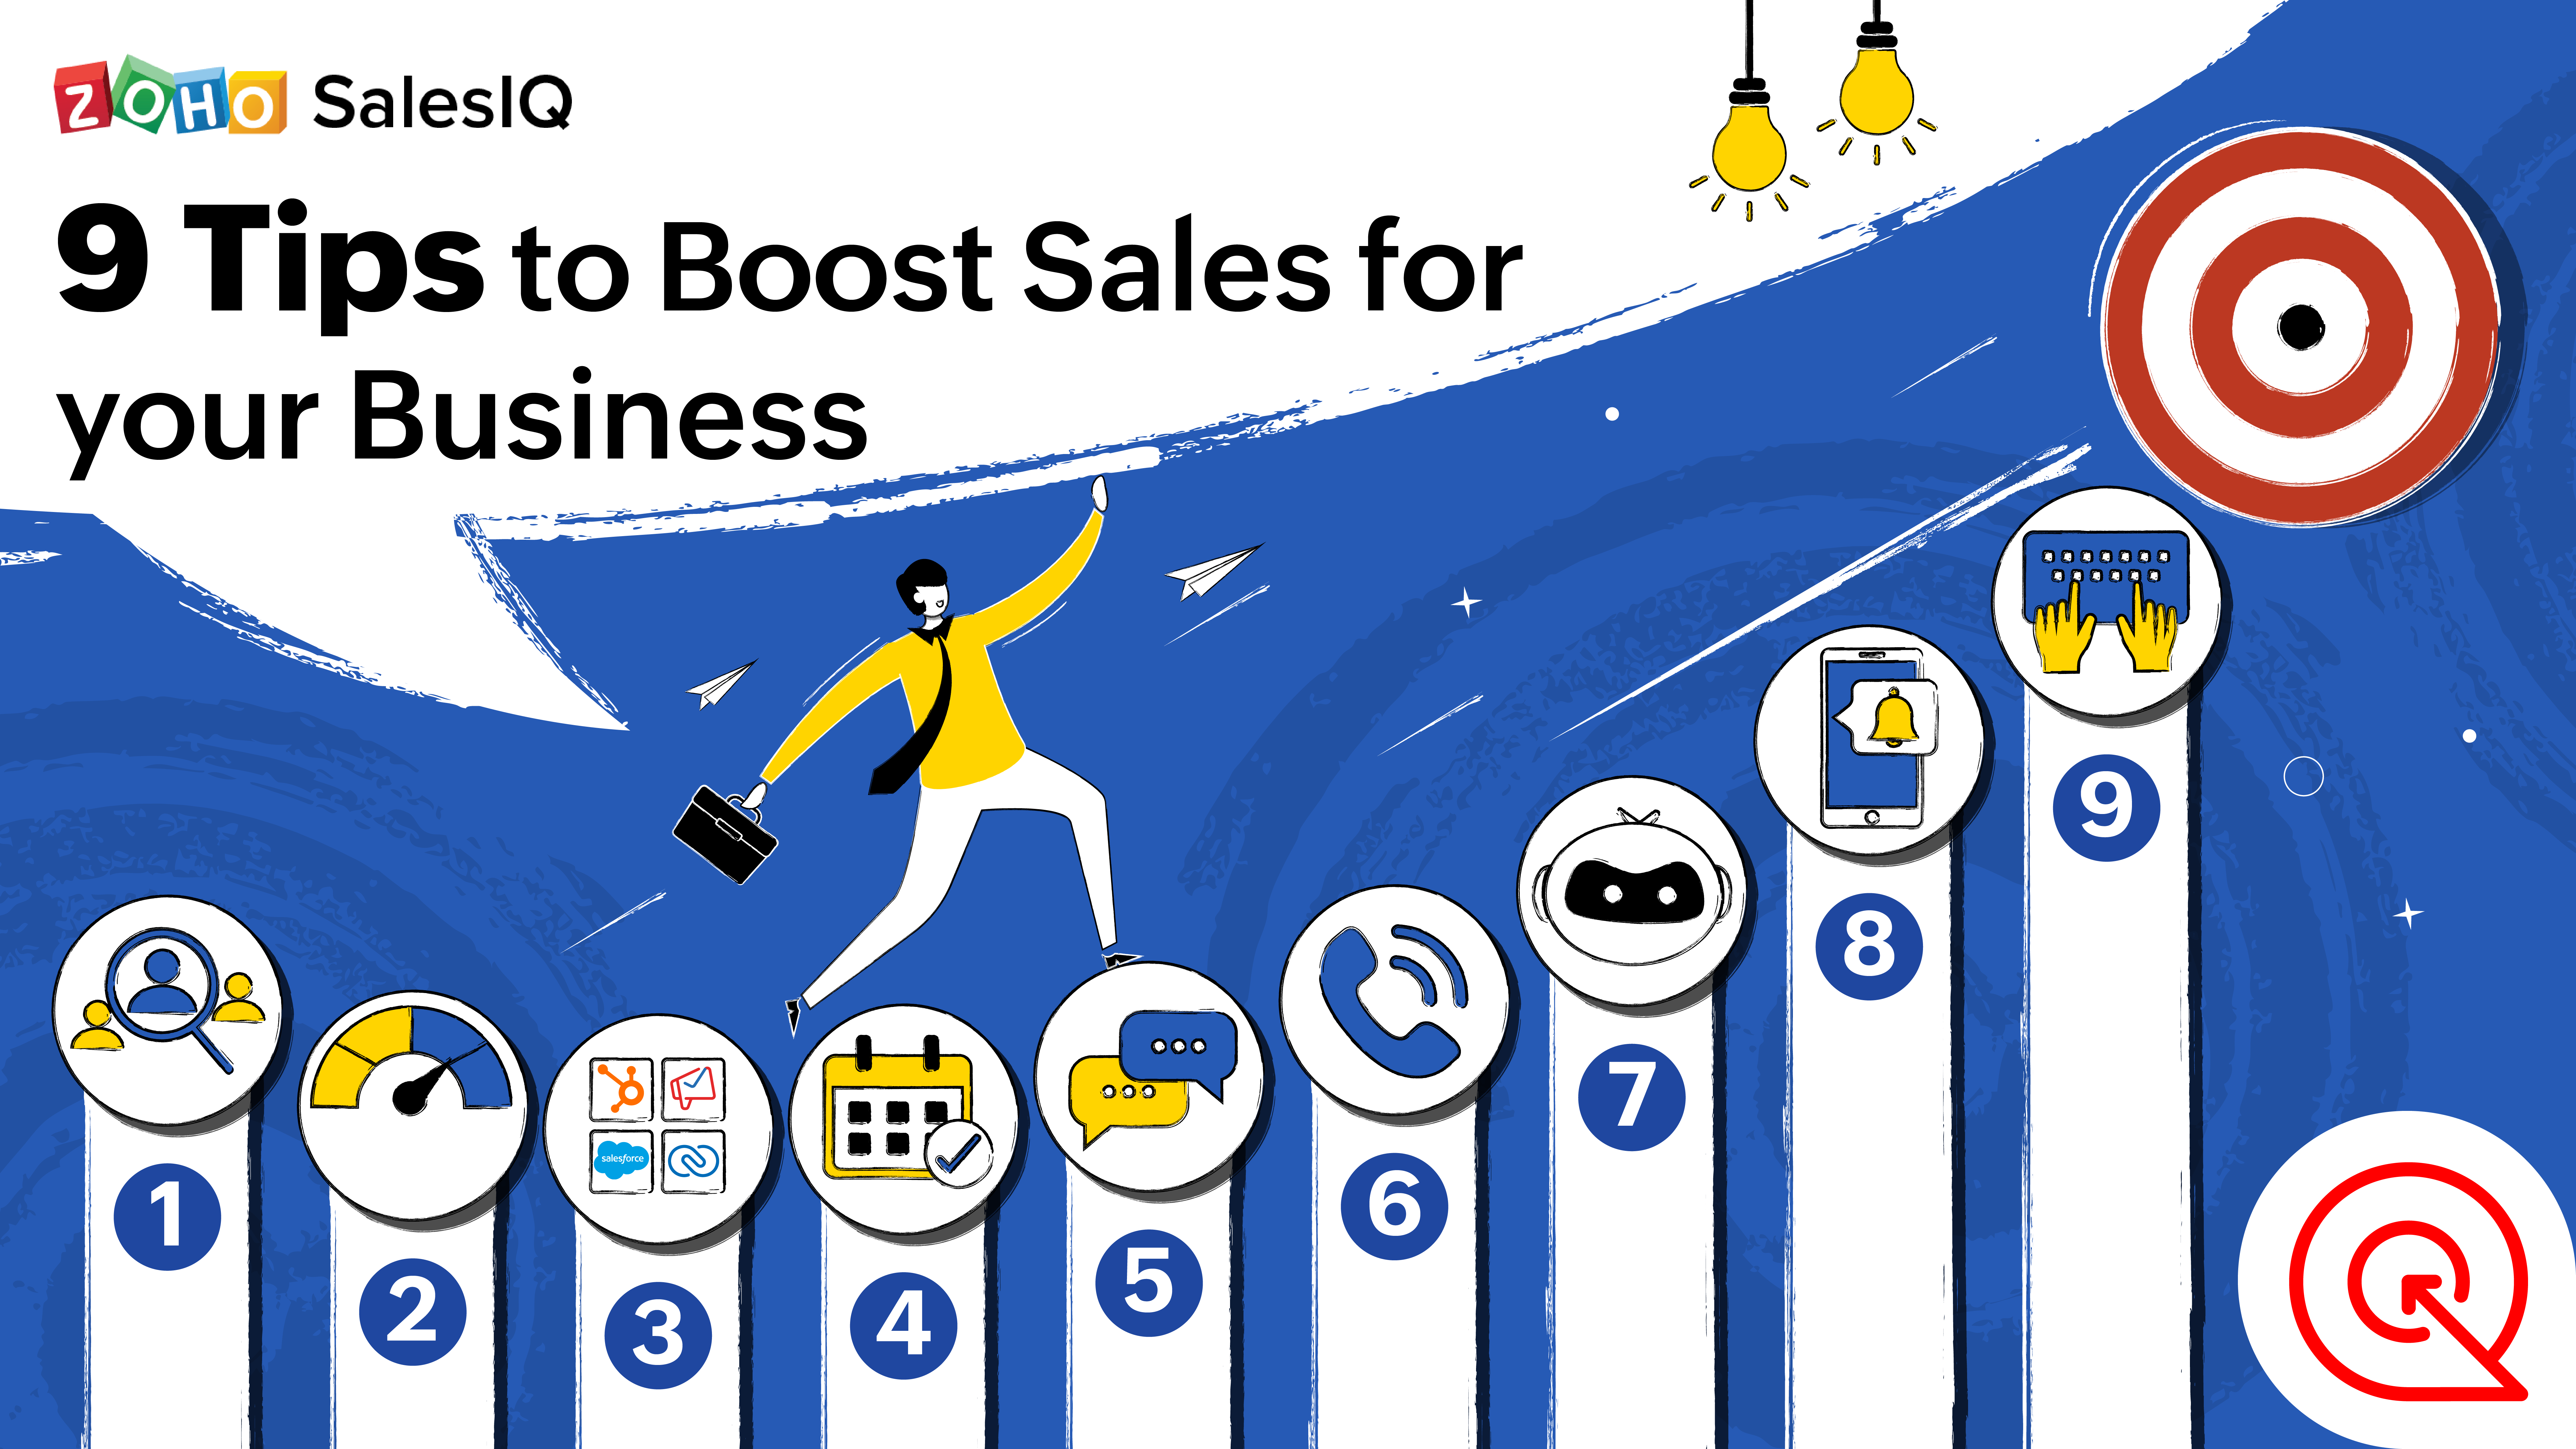 9 tips to boost sales for your business